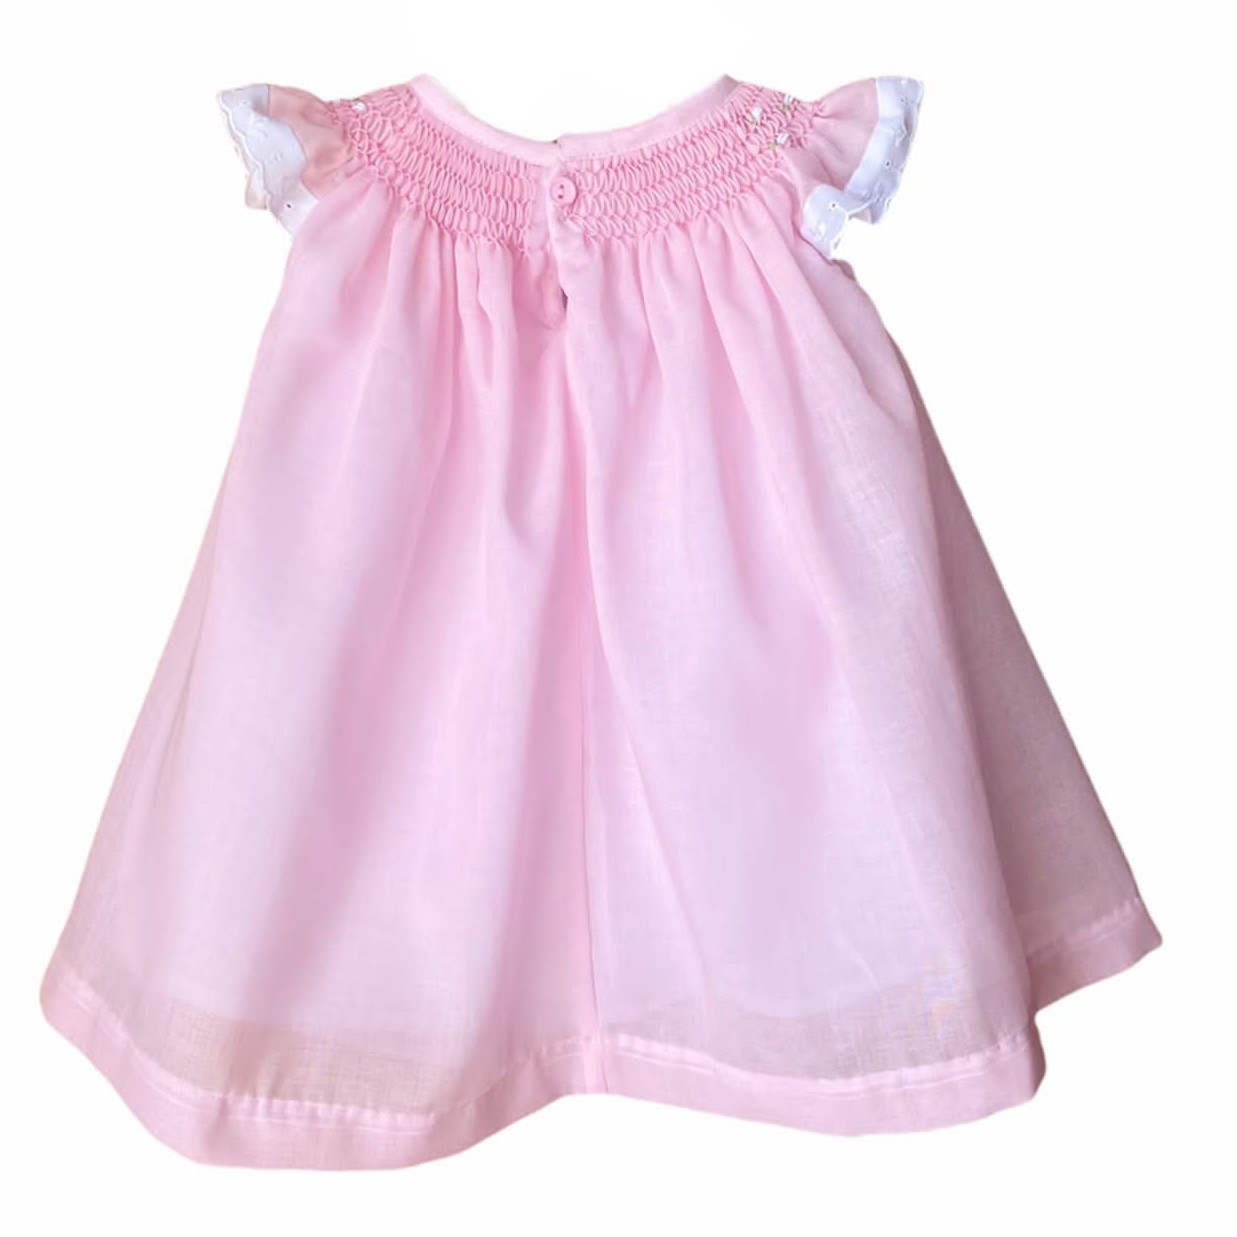 Girl's Dress with Hand Embroidery - Pink Color with White Embroidery